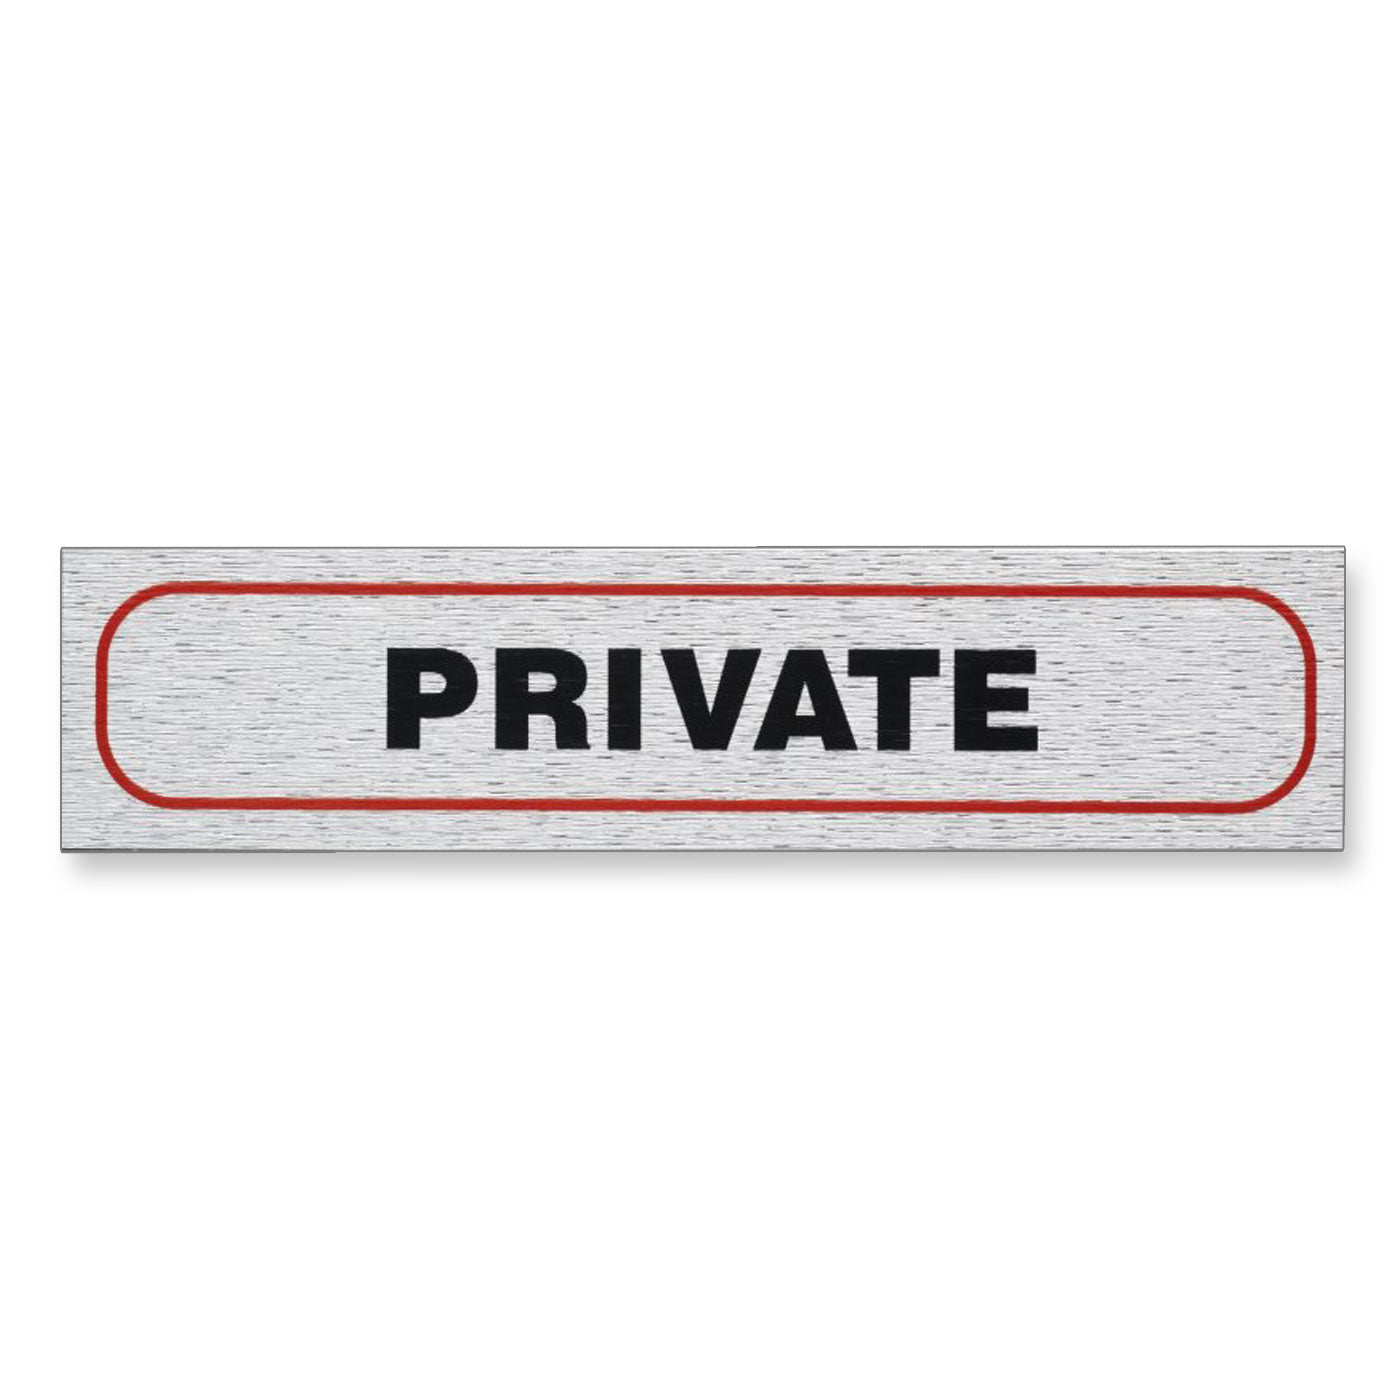 Information Sign "PRIVATE" 17 x 4 cm [Self-Adhesive]